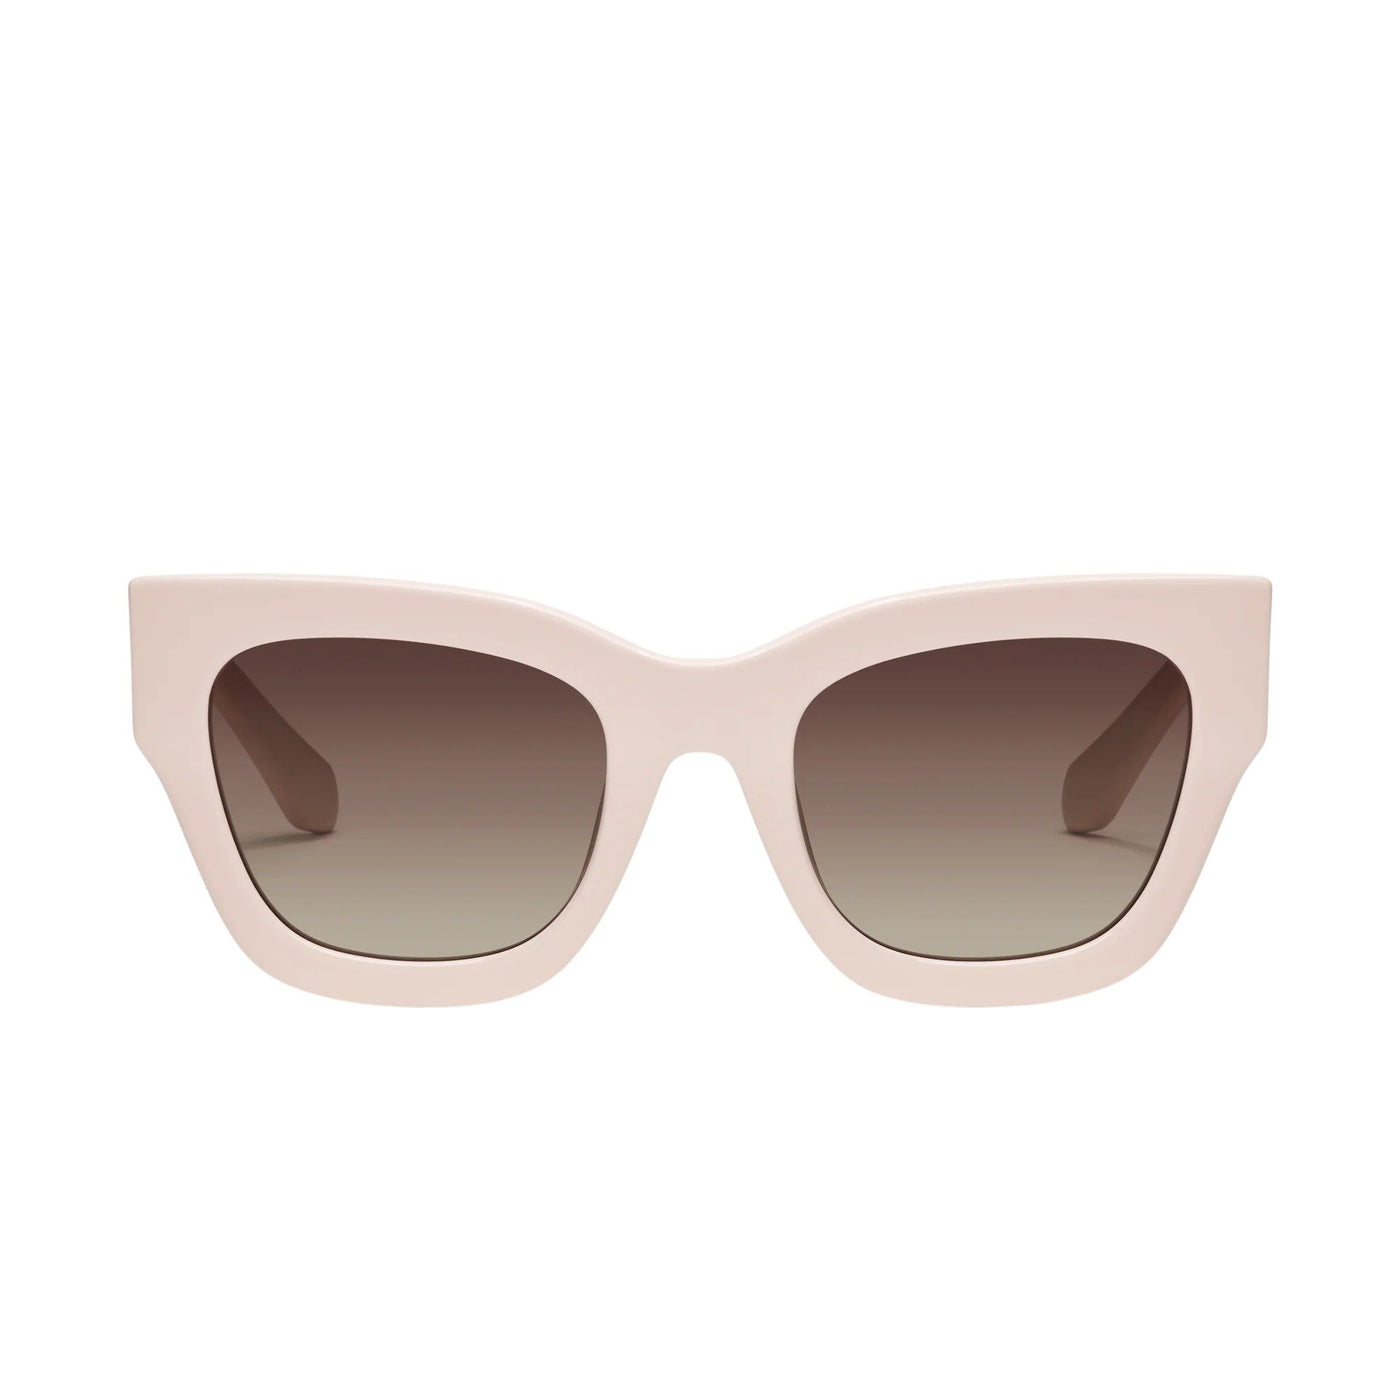 Quay Women's By The Way Oversized Square Sunglasses (Champagne Frame/Brown Lens) - front